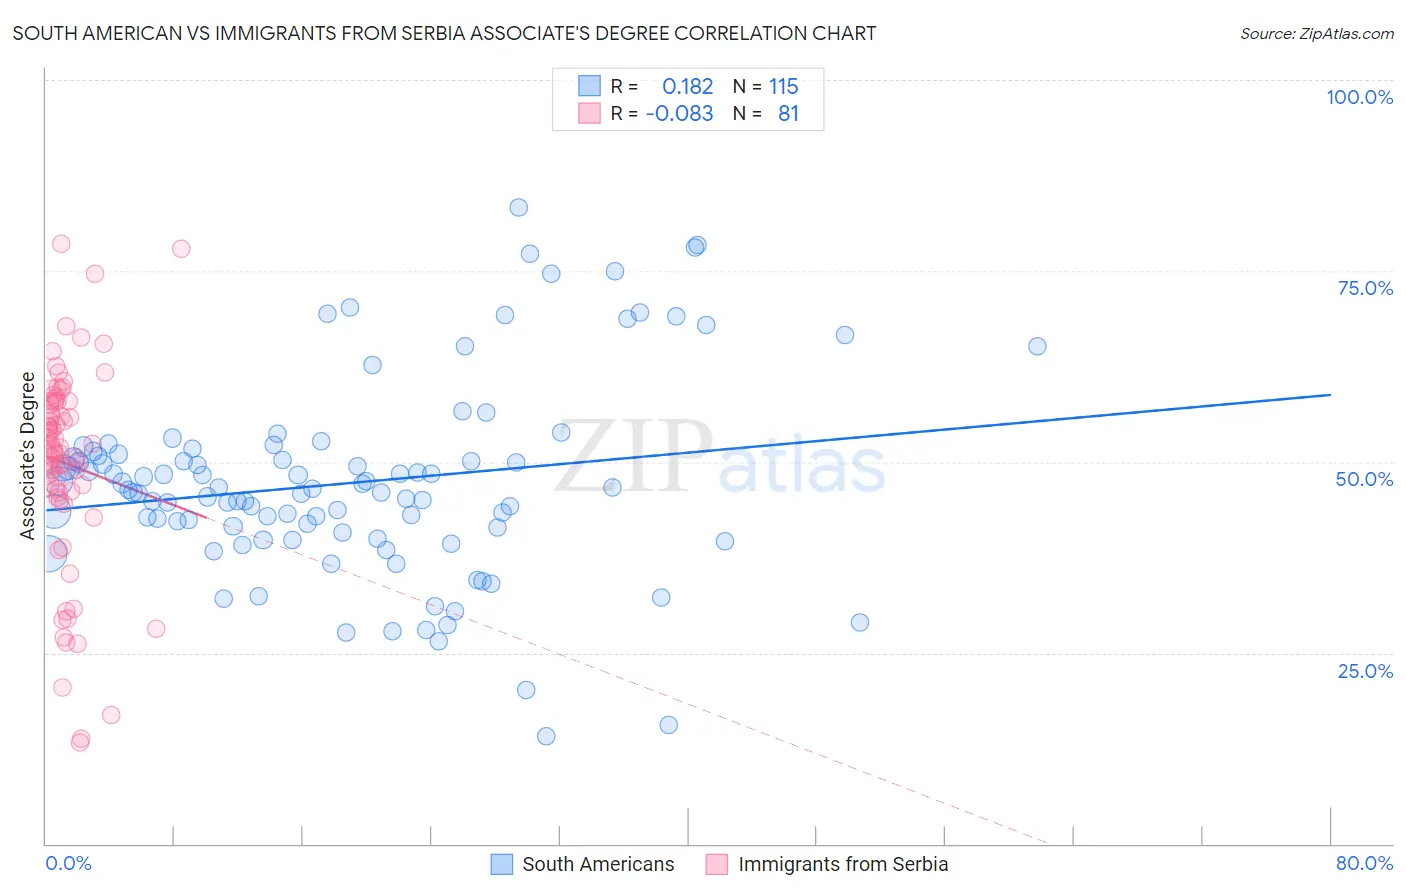 South American vs Immigrants from Serbia Associate's Degree